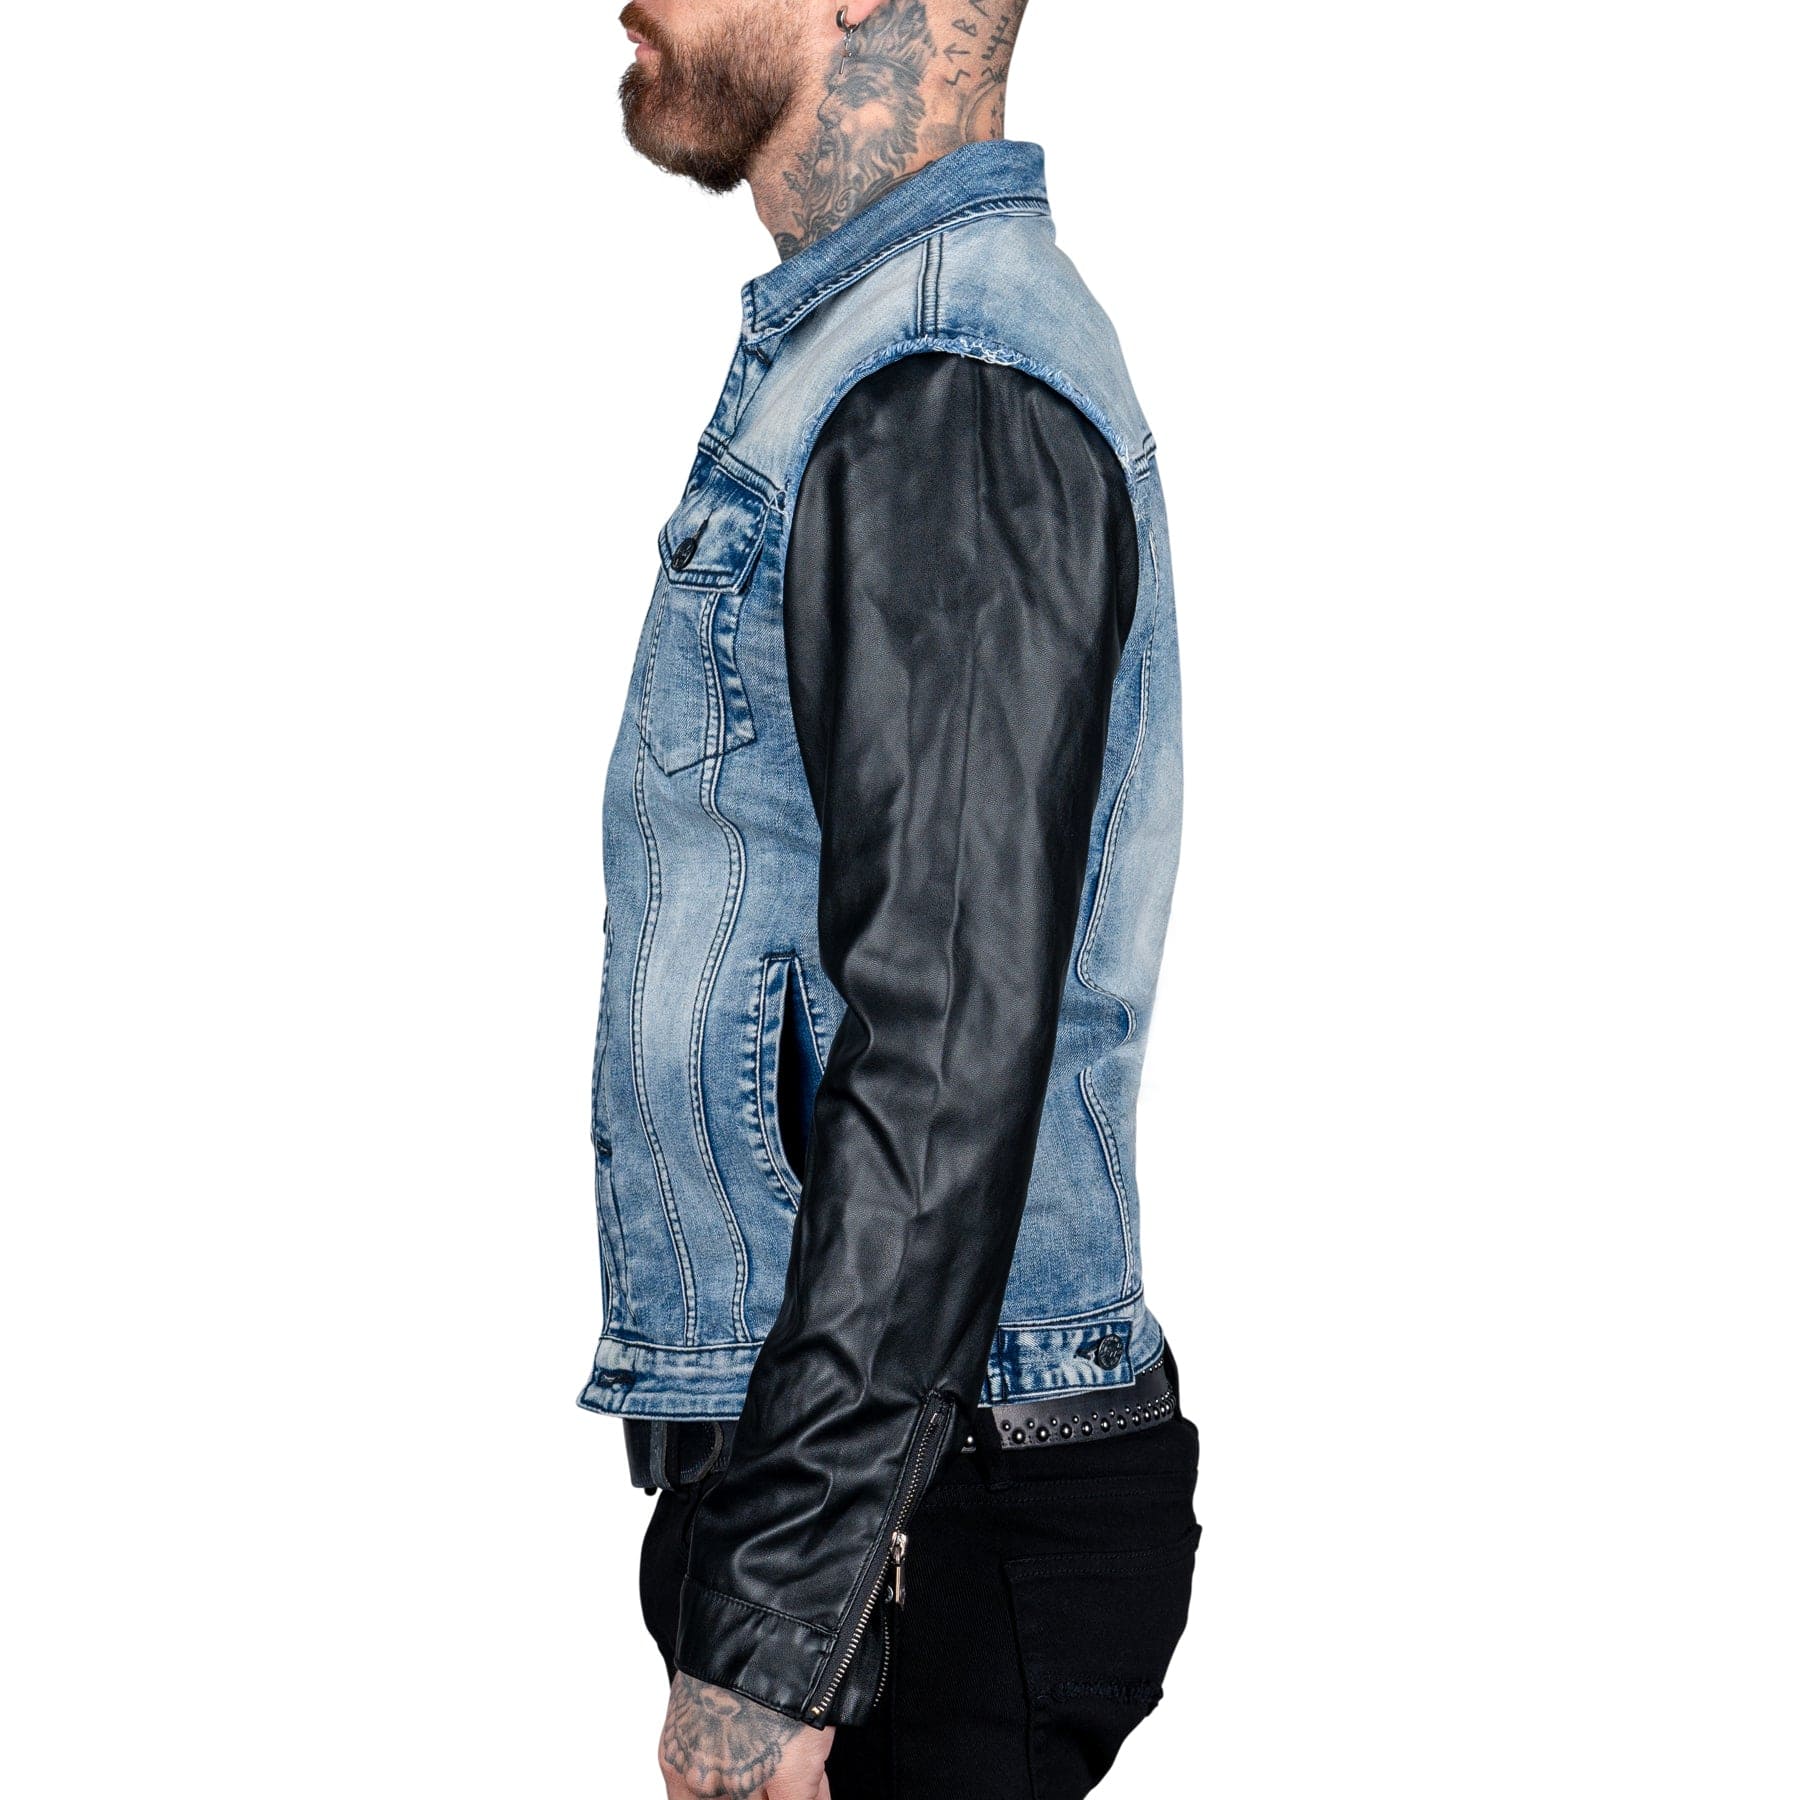 All Access Collection Jacket Whiplash Jacket